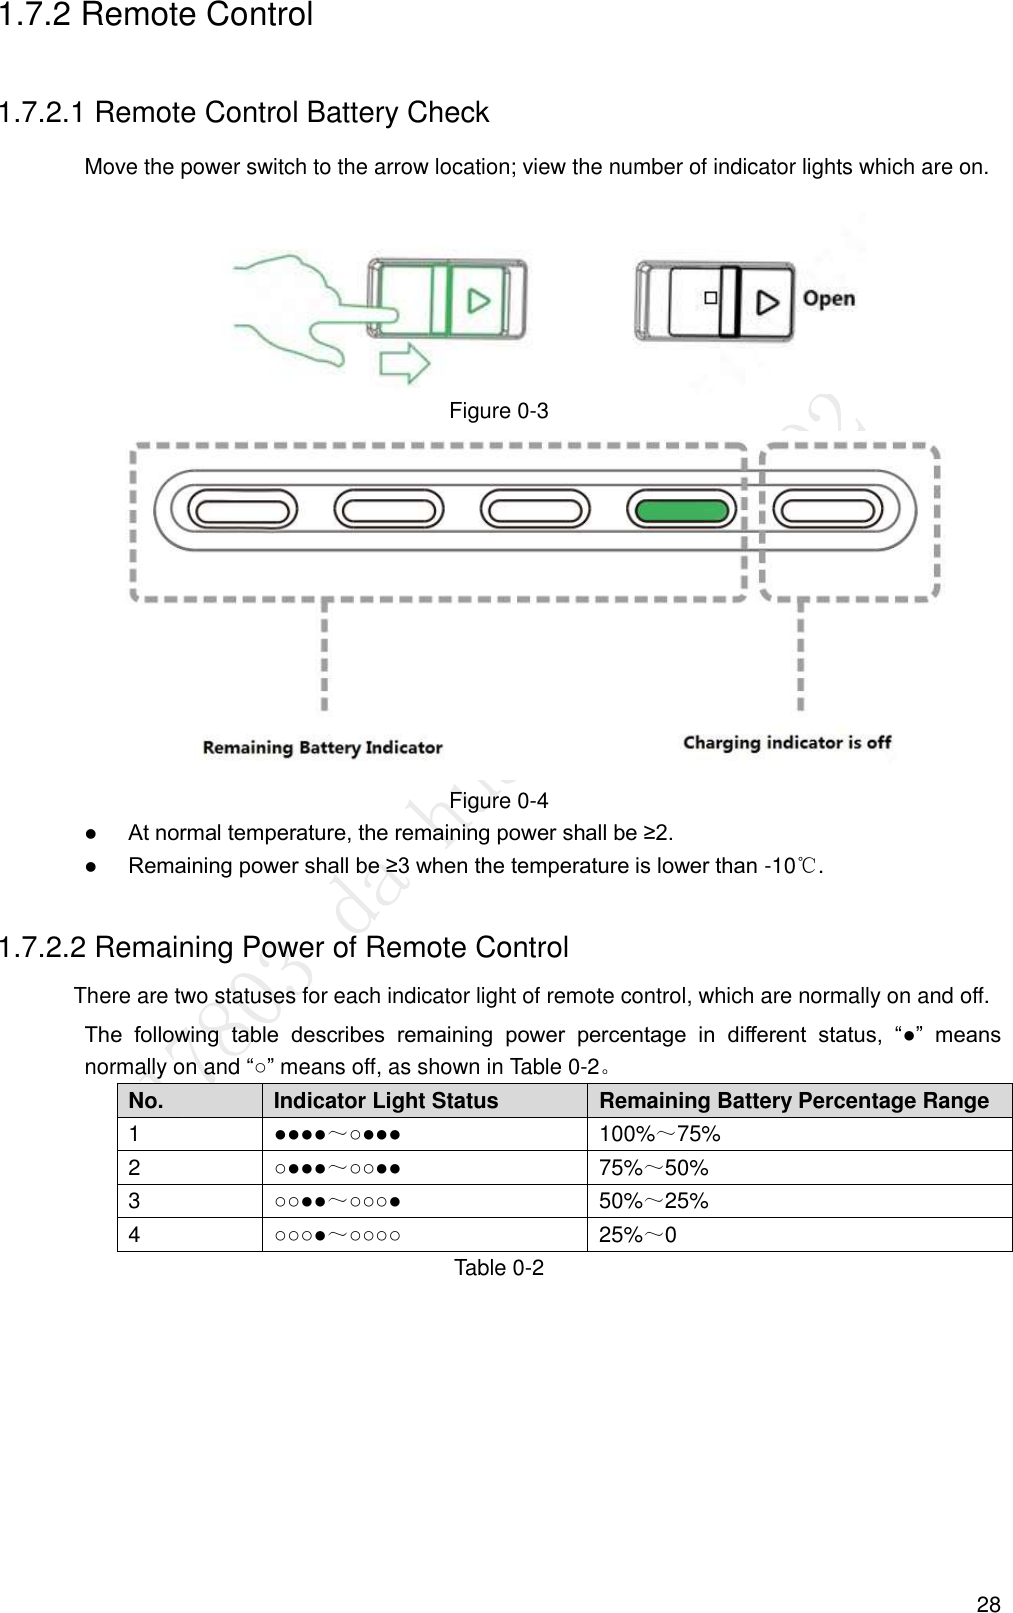  28 1.7.2 Remote Control 1.7.2.1 Remote Control Battery Check Move the power switch to the arrow location; view the number of indicator lights which are on.  Figure 0-3  Figure 0-4  At normal temperature, the remaining power shall be ≥2.  Remaining power shall be ≥3 when the temperature is lower than -10℃. 1.7.2.2 Remaining Power of Remote Control There are two statuses for each indicator light of remote control, which are normally on and off. The  following  table  describes  remaining  power  percentage  in  different  status,  “●”  means normally on and “○” means off, as shown in Table 0-2。 No. Indicator Light Status Remaining Battery Percentage Range 1 ●●●●～○●●● 100%～75% 2 ○●●●～○○●● 75%～50% 3 ○○●●～○○○● 50%～25% 4 ○○○●～○○○○ 25%～0 Table 0-2 